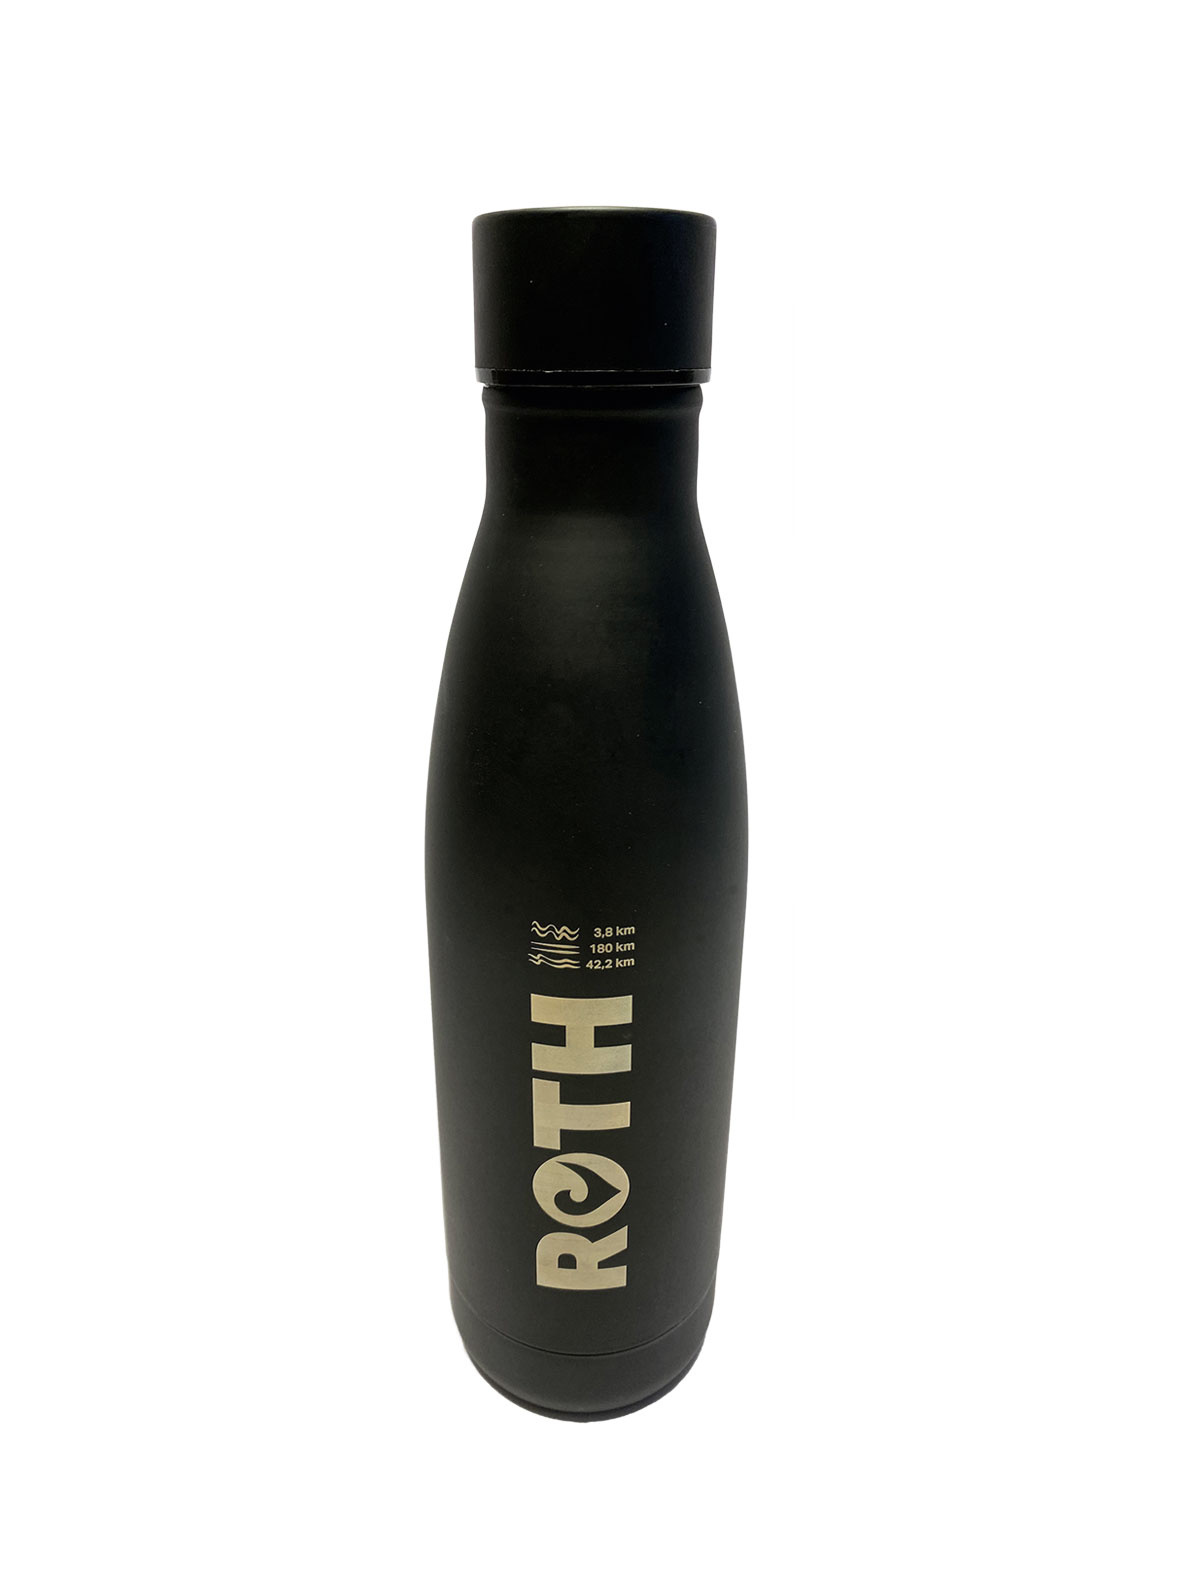 Stainless steel thermo drink bottle, 500ml